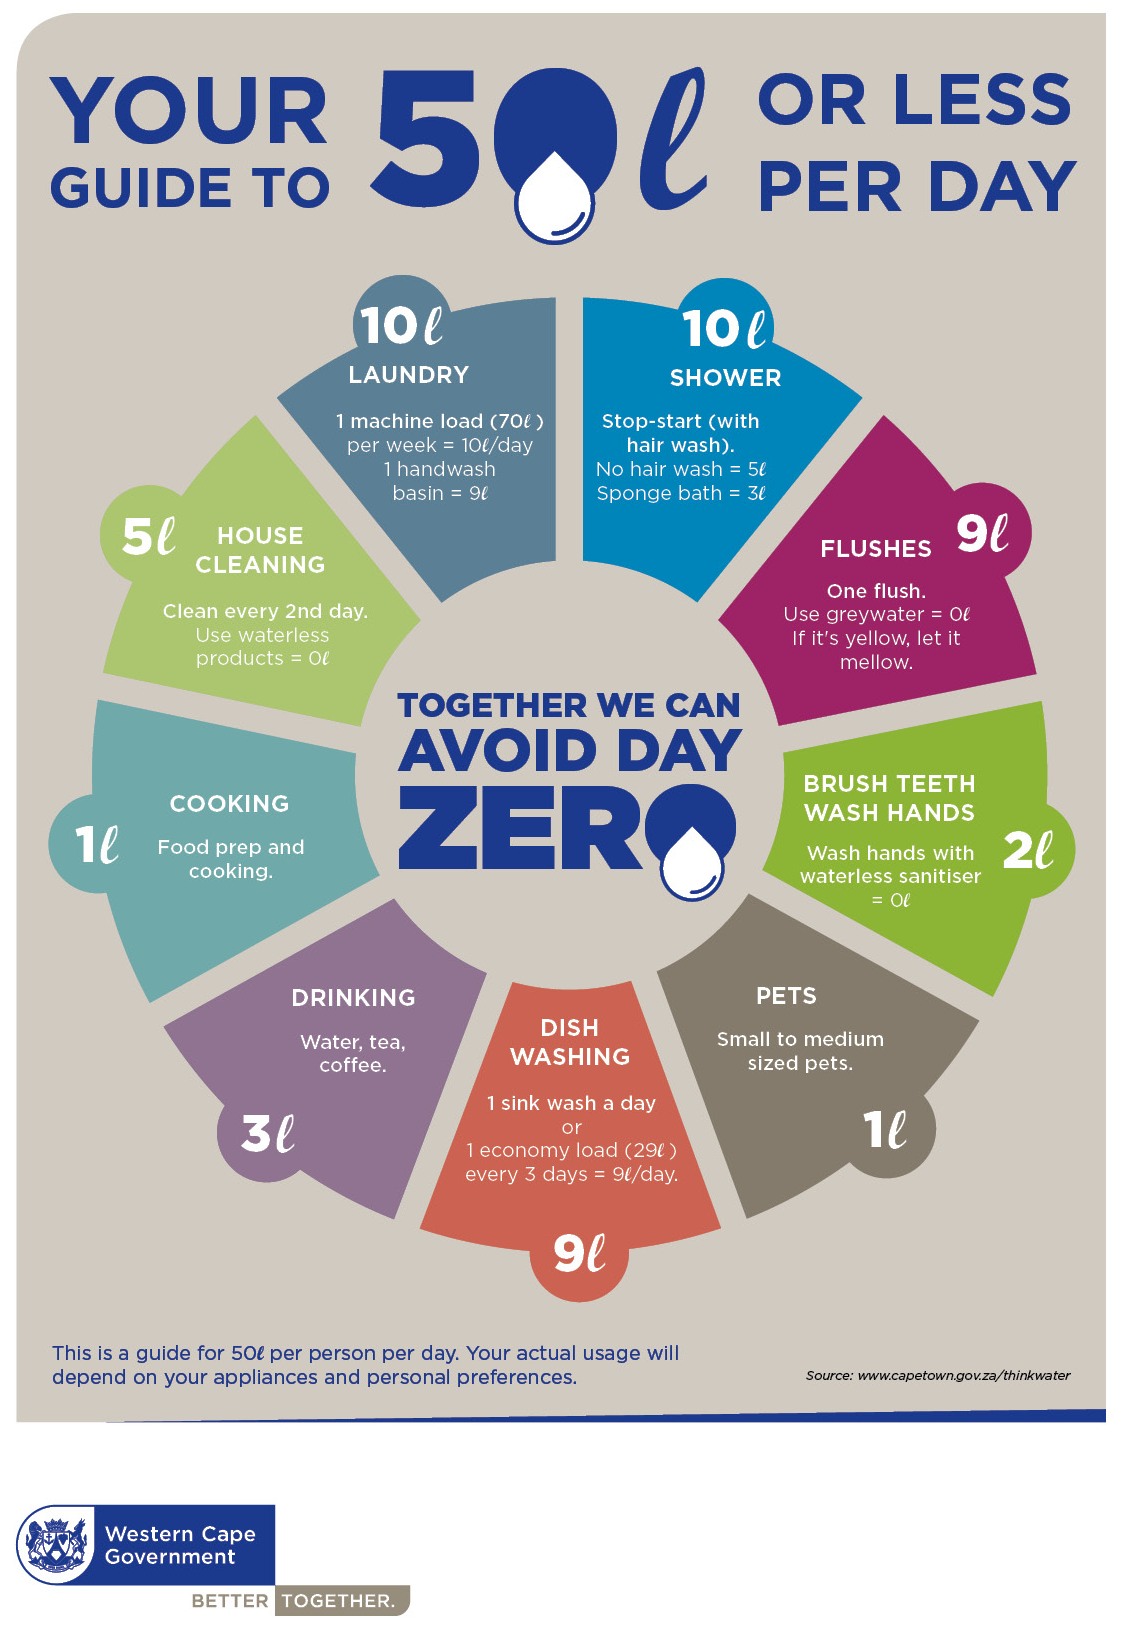 your guide to use 50 litres of water per day | western cape government